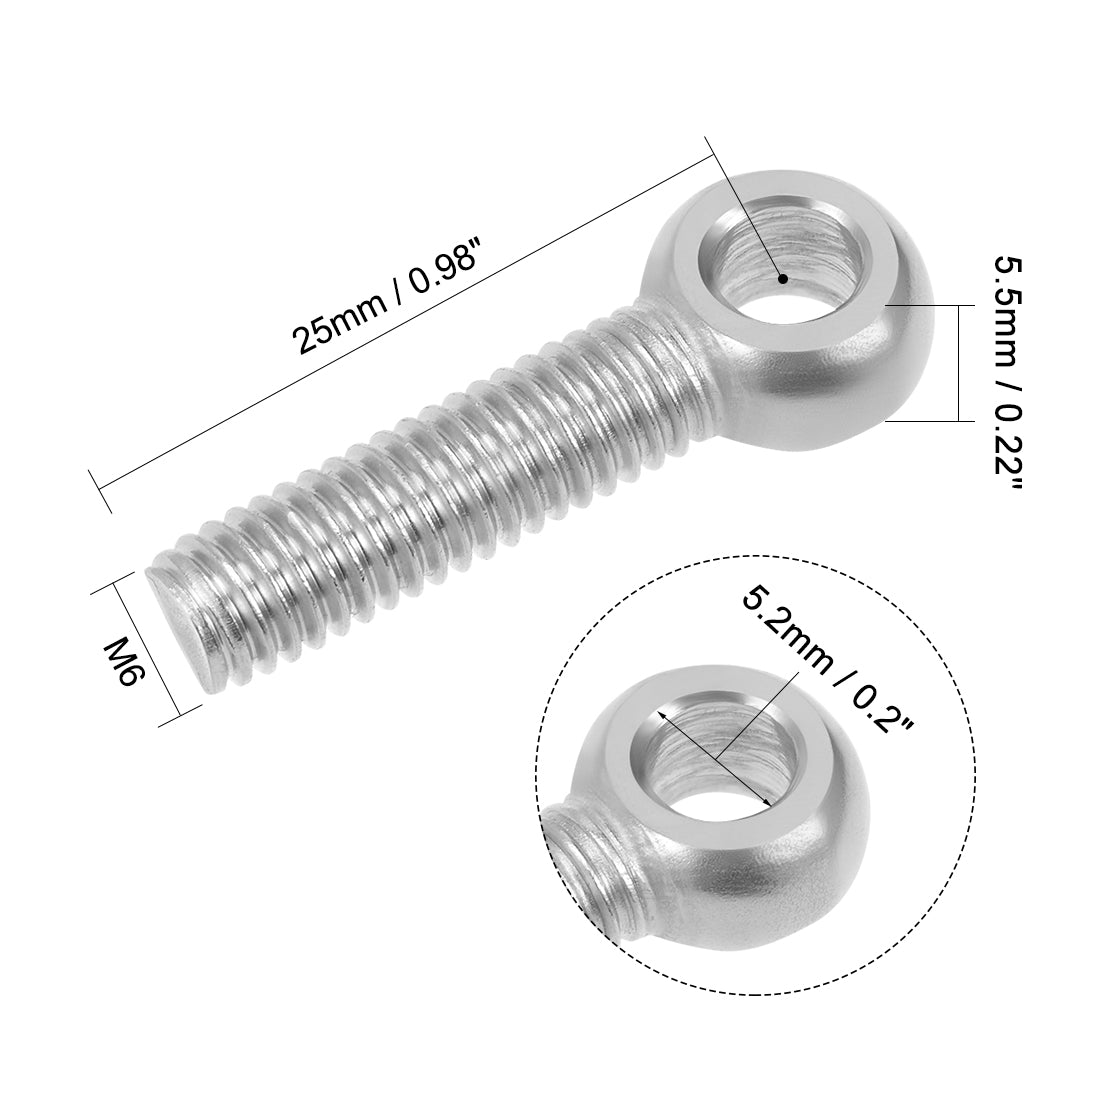 uxcell Uxcell M6 x 25mm Machinery Shoulder Swing Lifting Eye Bolt 304 Stainless Steel Metric Thread 5pcs